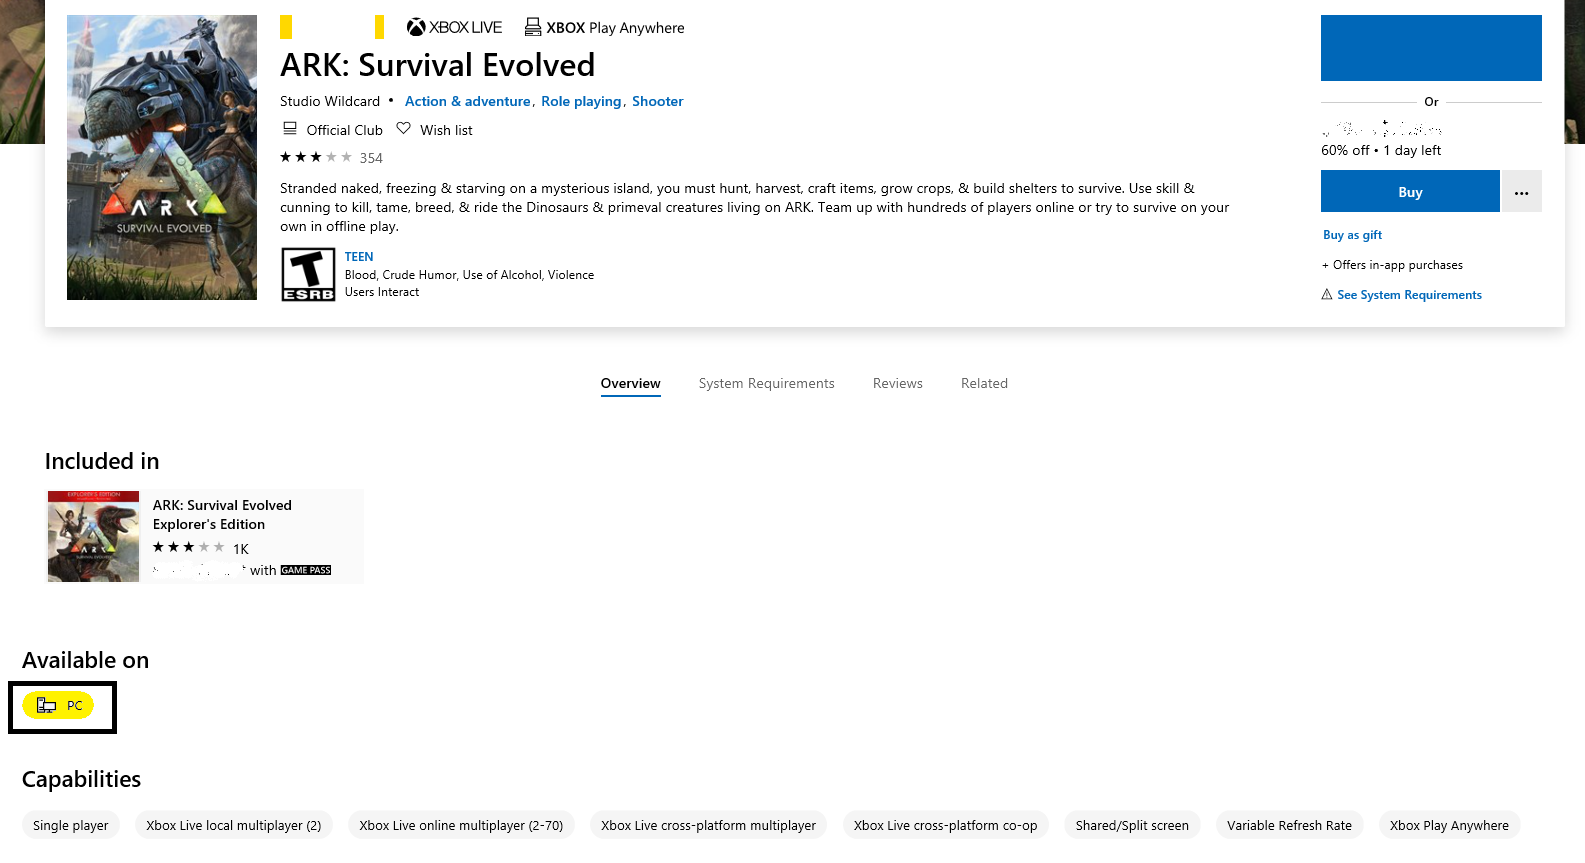 Ark survival evolved from the microsoft store 5567ef09-31cd-4f2a-a8a4-a4acf13167fe?upload=true.png